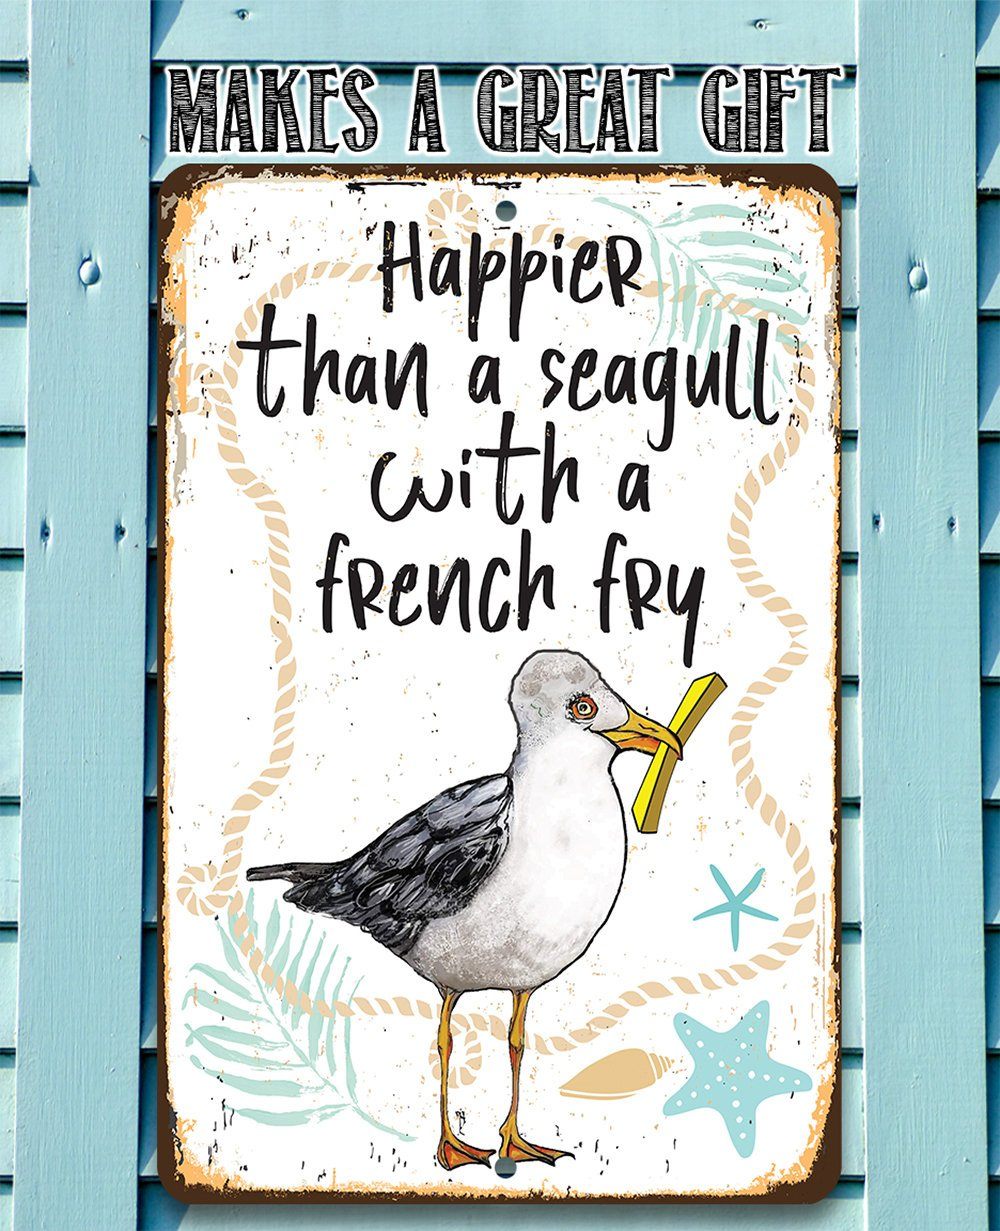 Seagull with French Fry - Metal Sign | Lone Star Art.